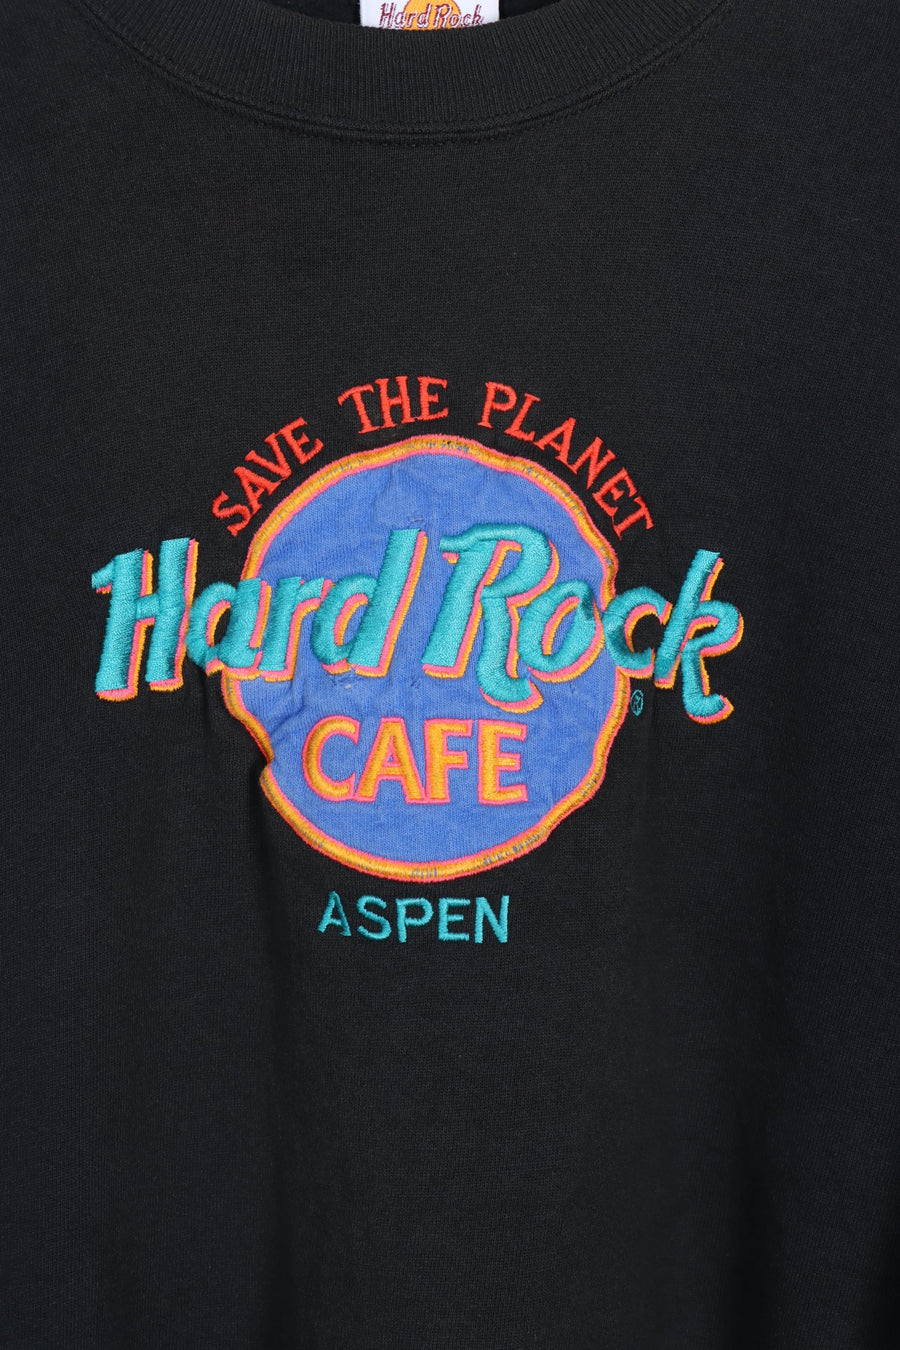 HARD ROCK CAFE Aspen 'Save the Planet' Embroidered Sweatshirt USA Made (M)